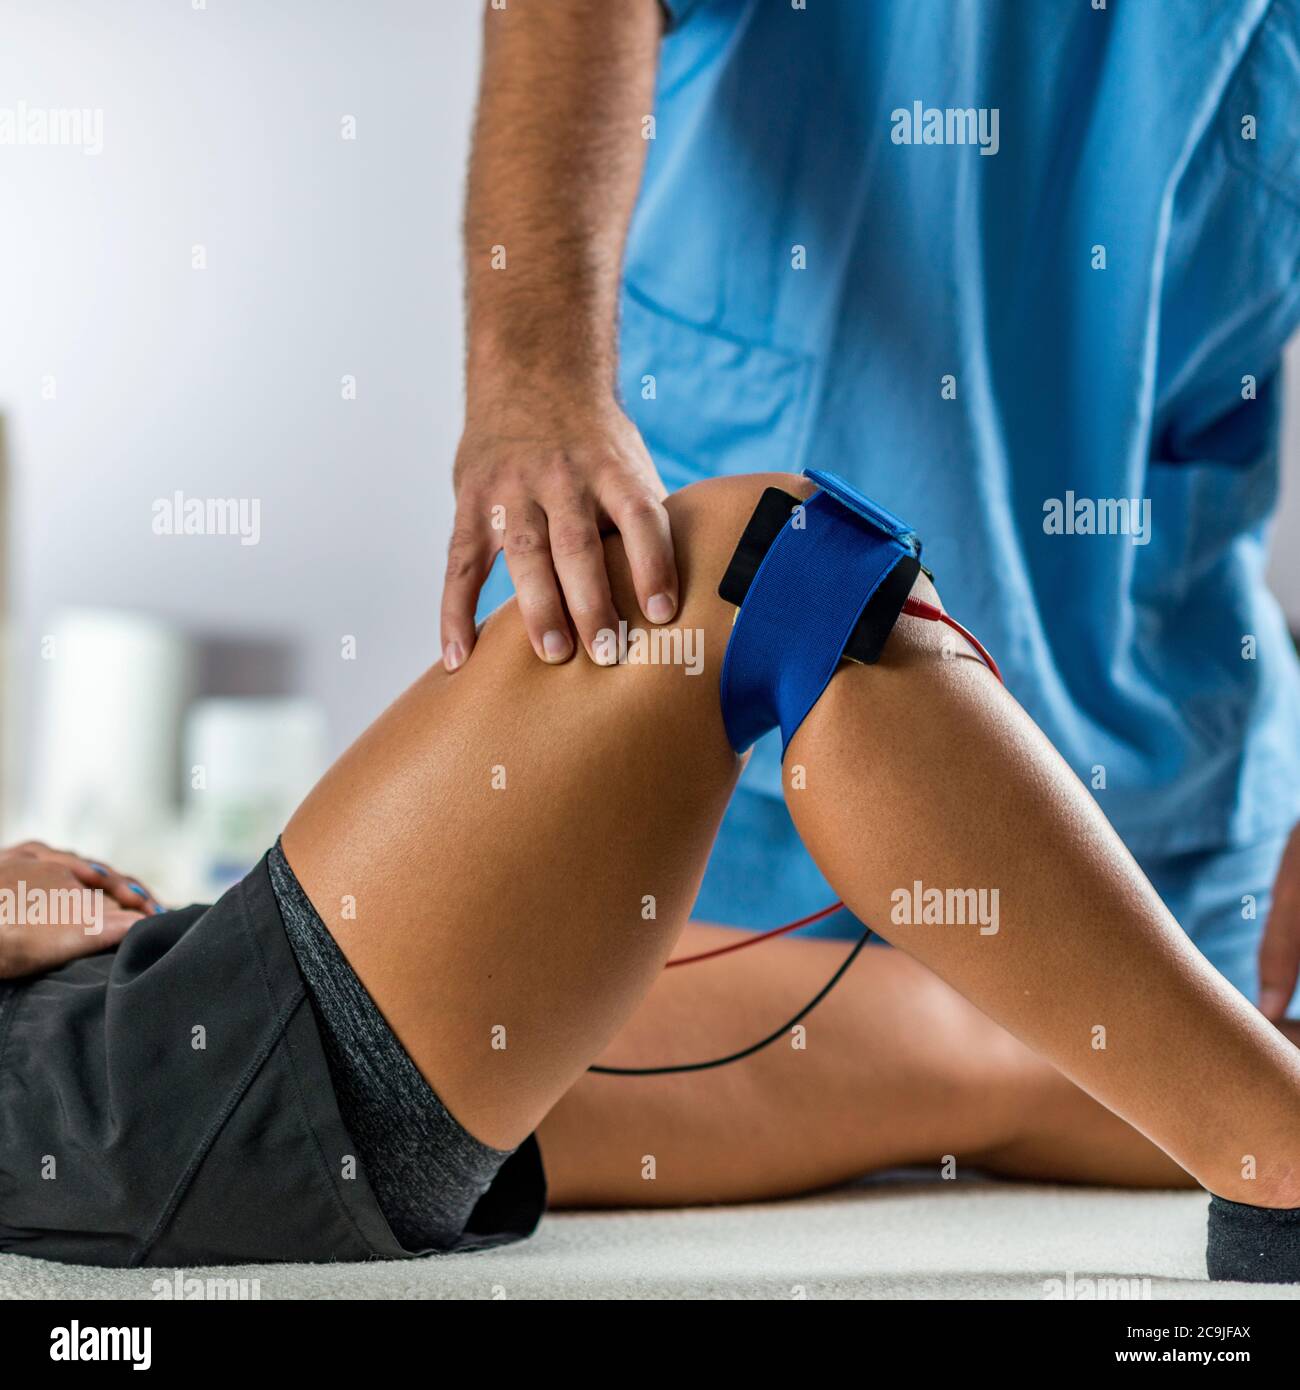 https://c8.alamy.com/comp/2C9JFAX/electrical-muscle-stimulation-in-physical-therapy-therapist-positioning-electrodes-on-a-patients-knee-2C9JFAX.jpg